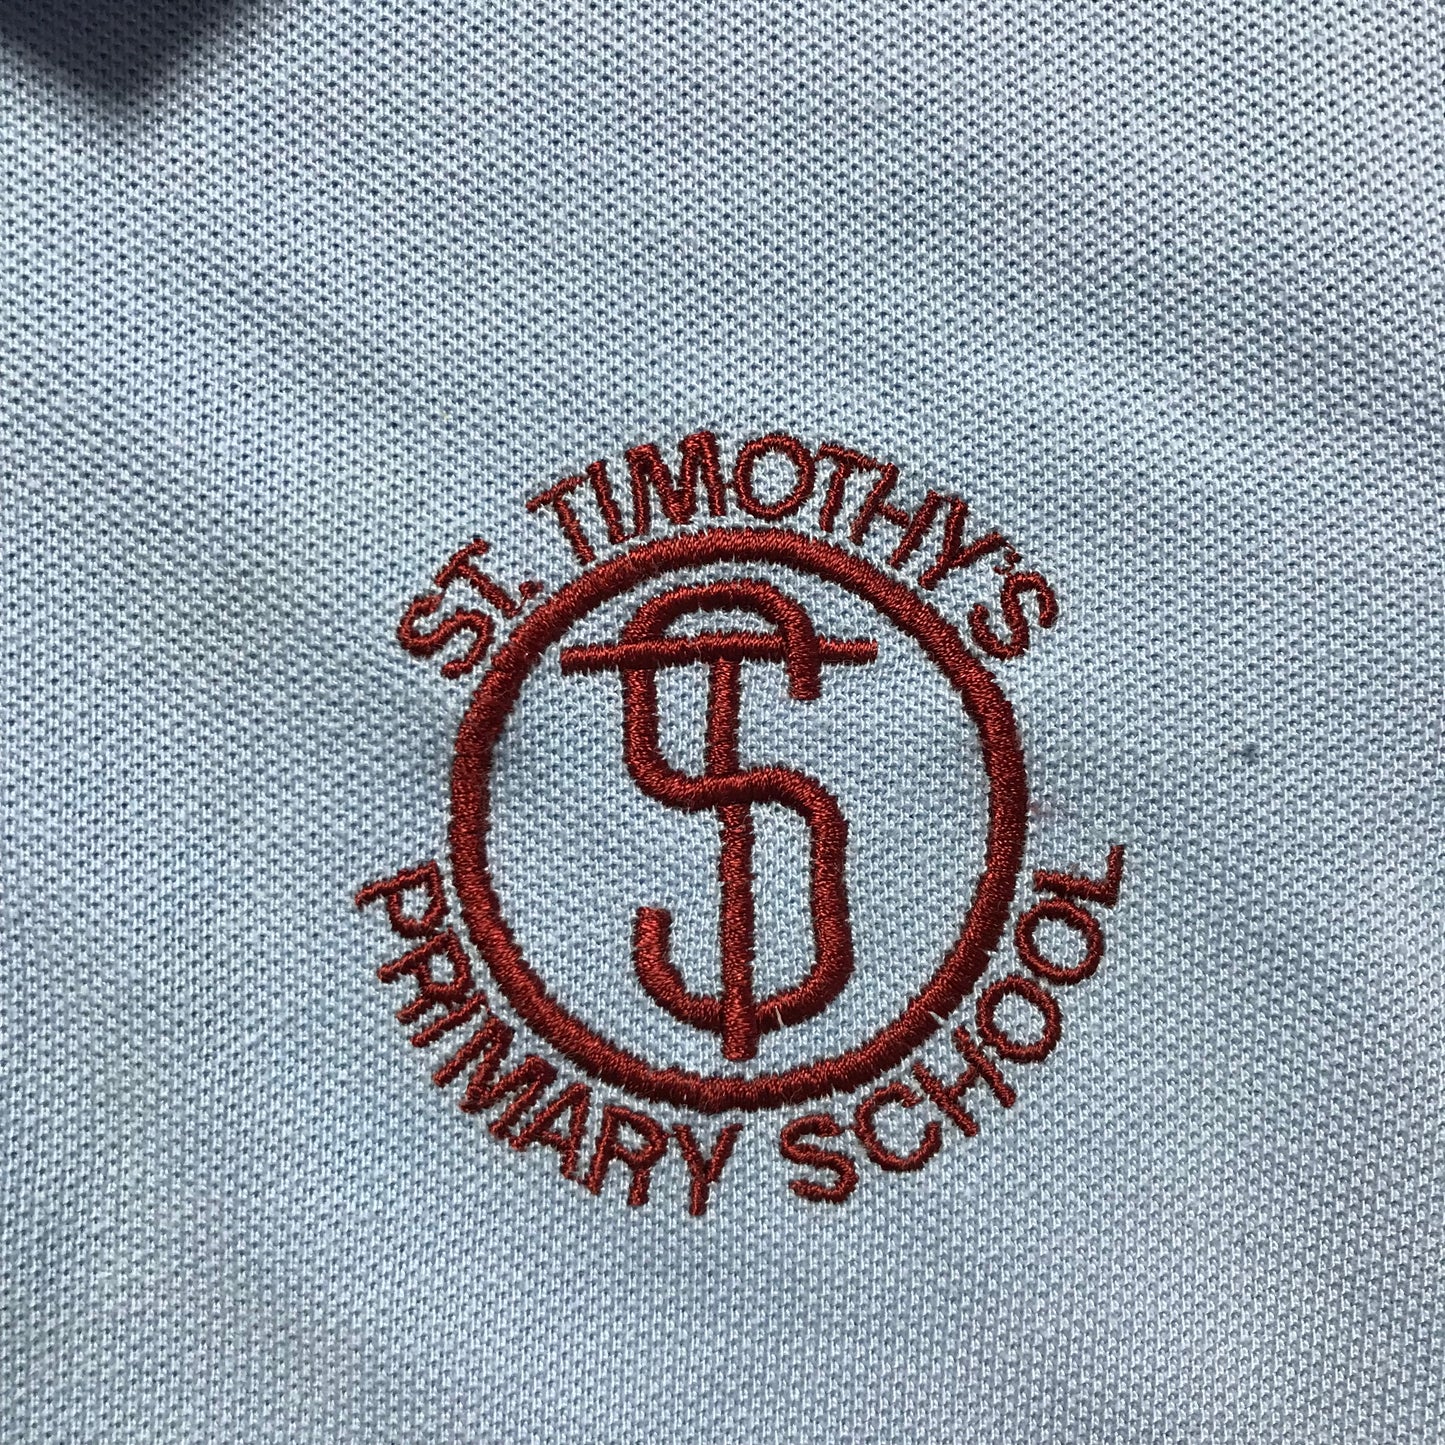 St. Timothy's Primary Light Blue Polo Shirt